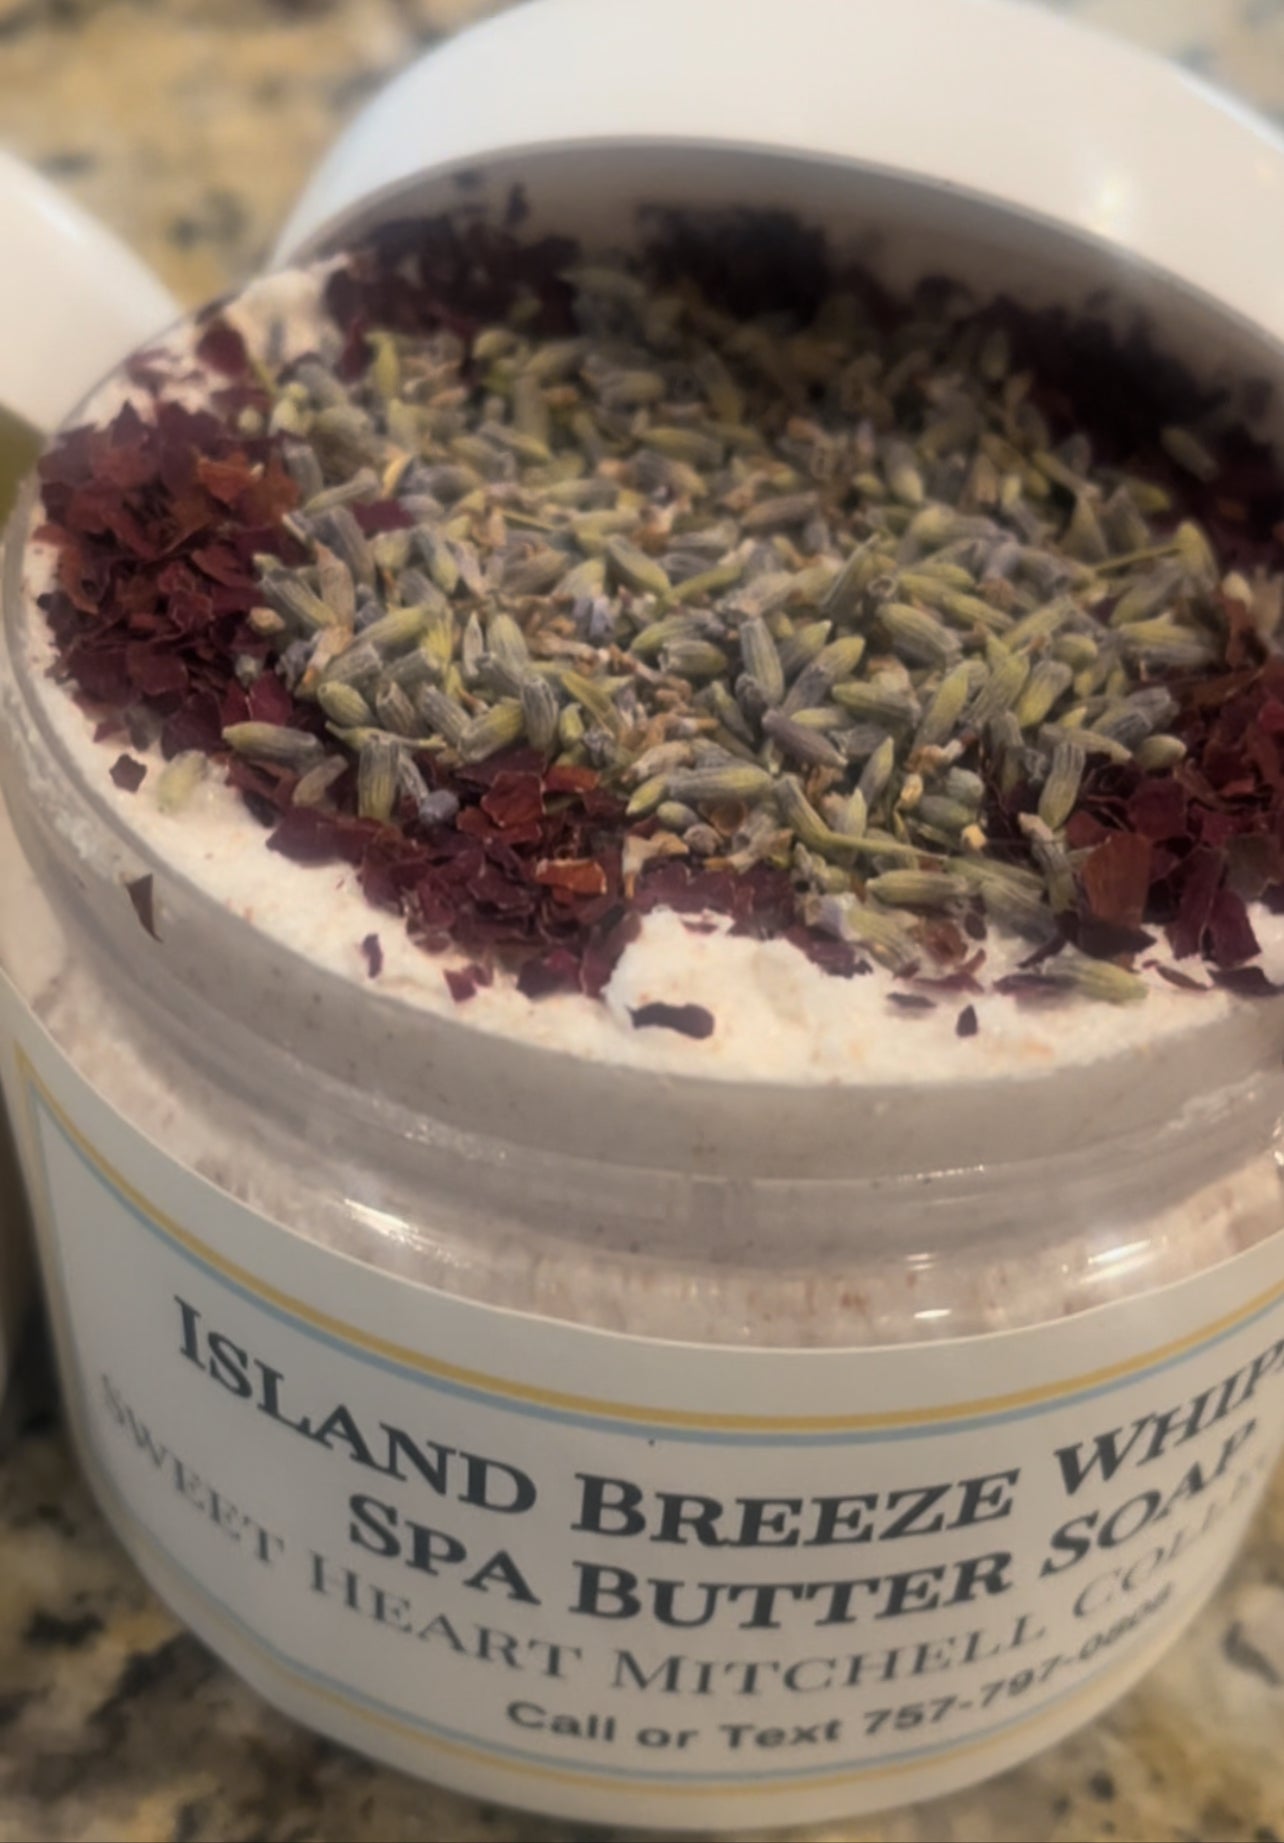 12 oz Island Breeze Whipped Spa Butter